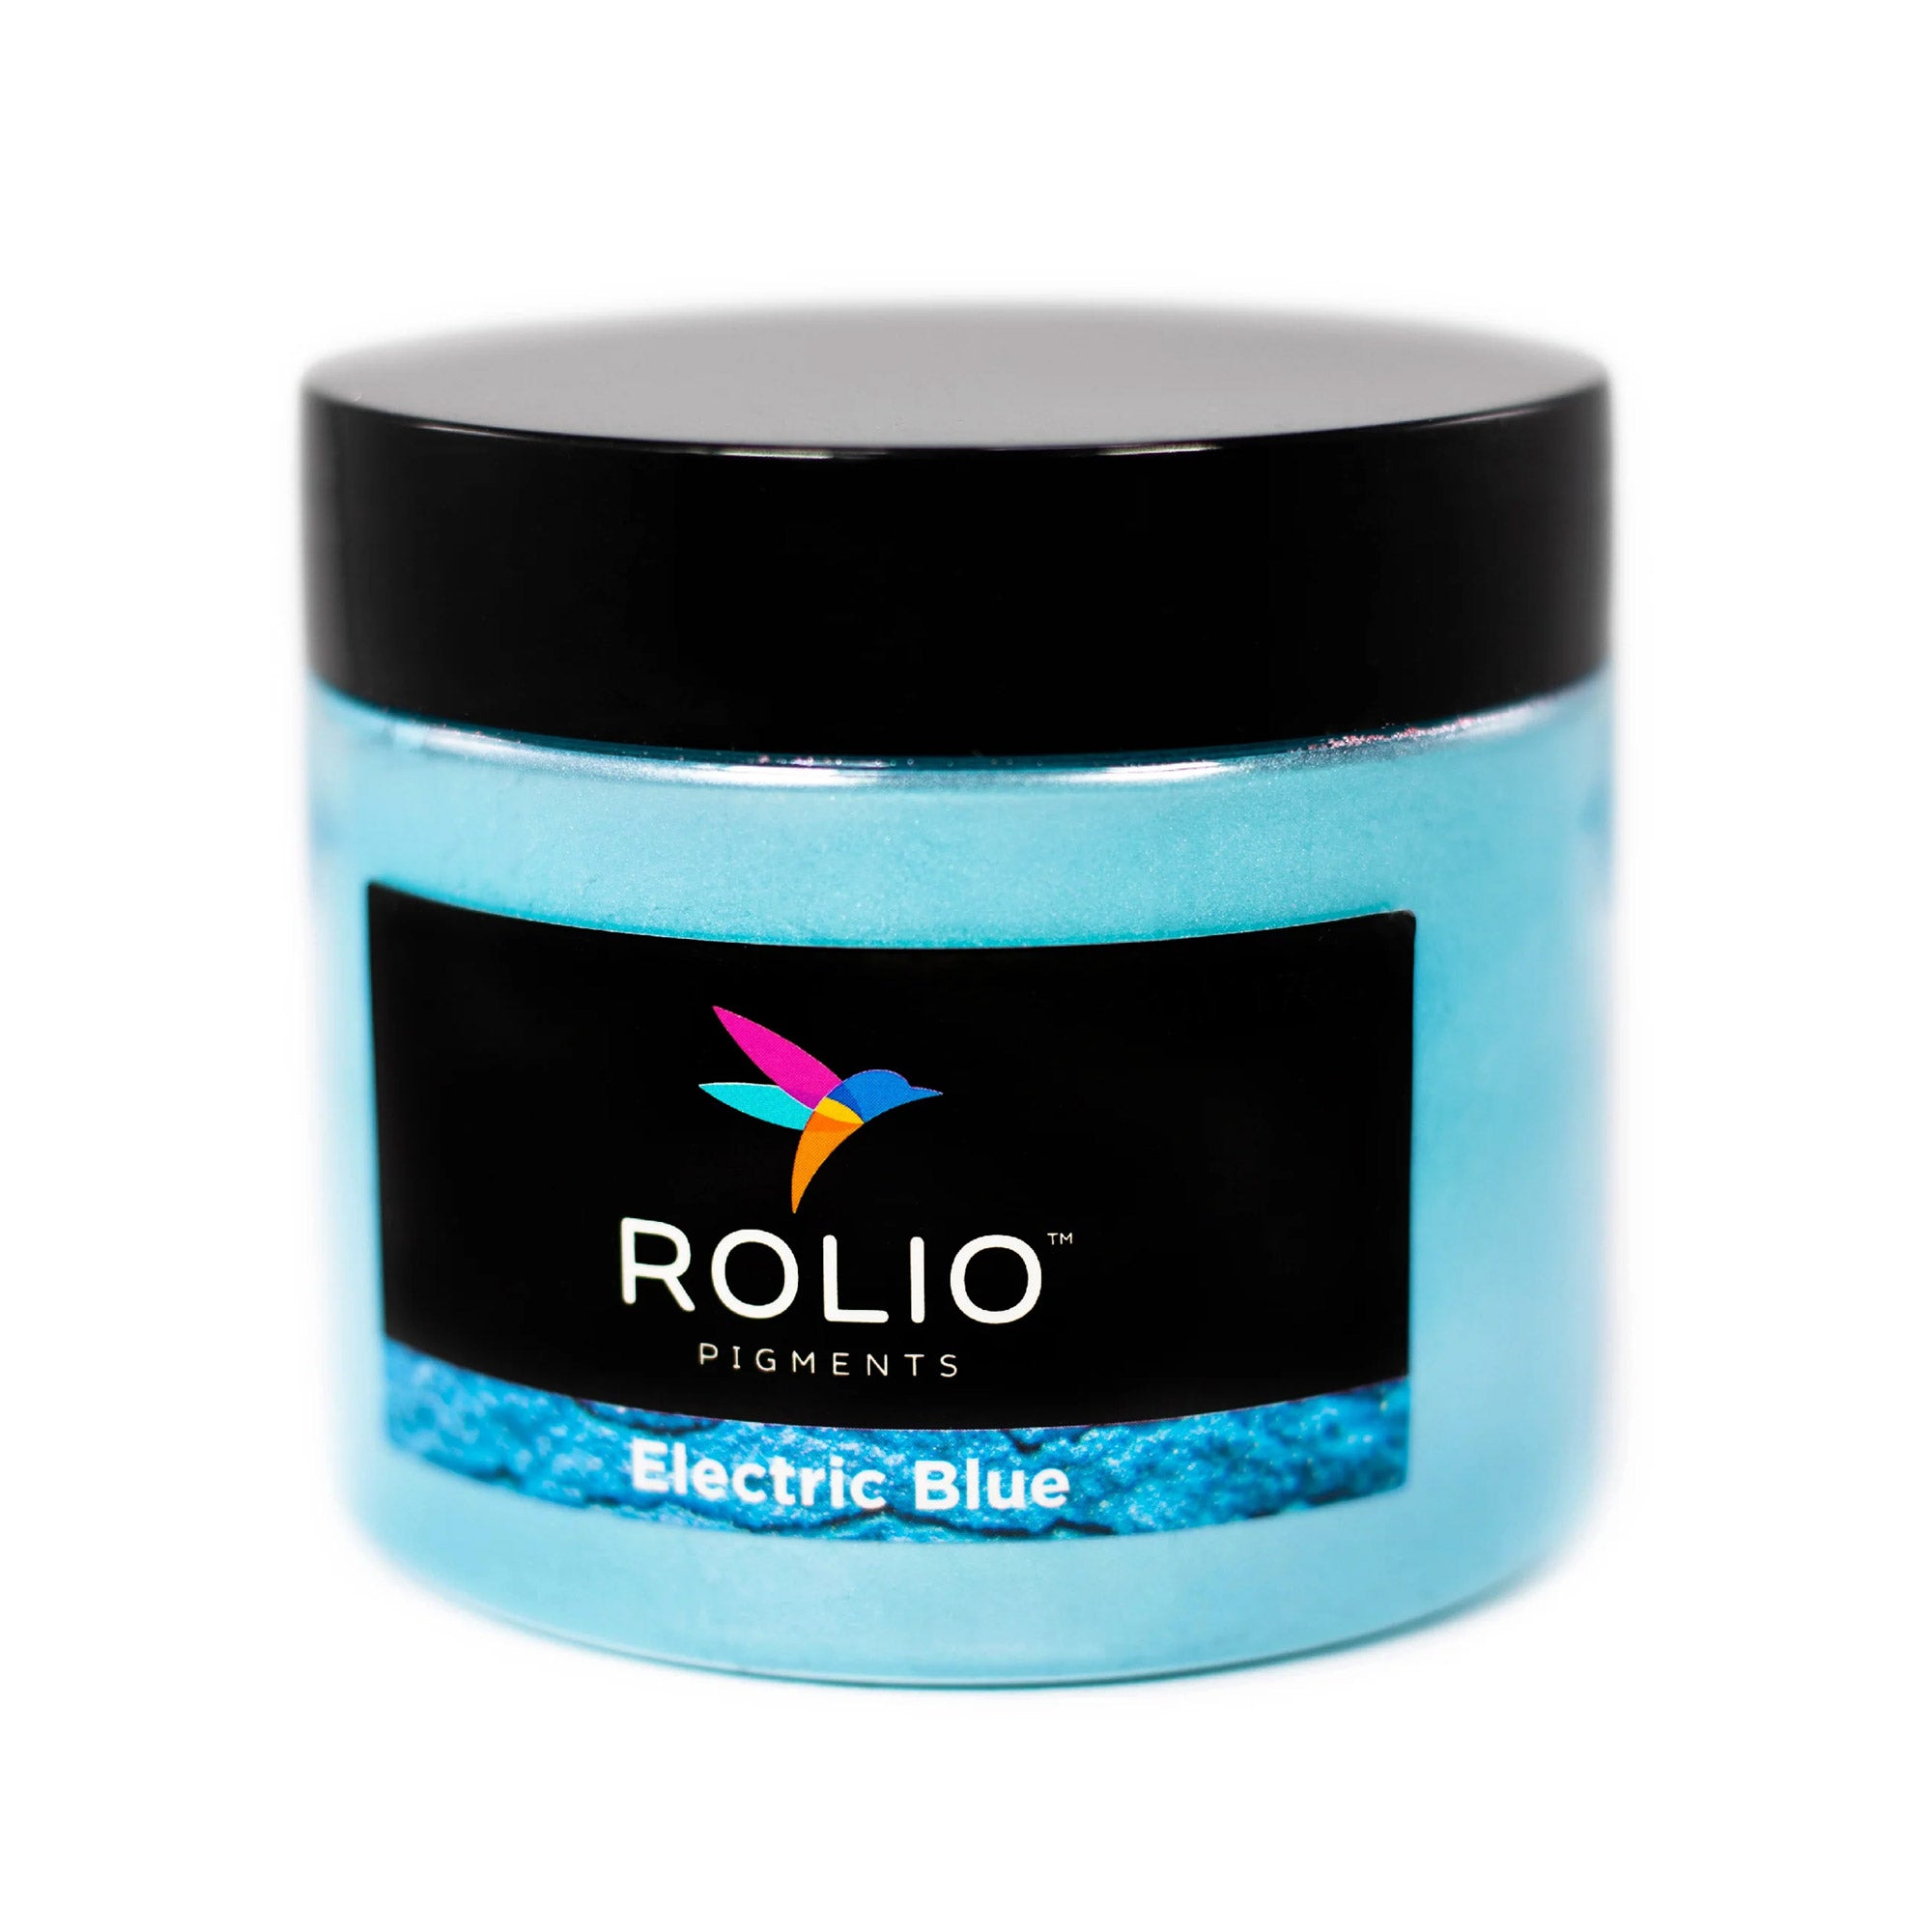 Epoxy Resin Color Pigment - Crystal Blue 50g - Mica Powder - Tint